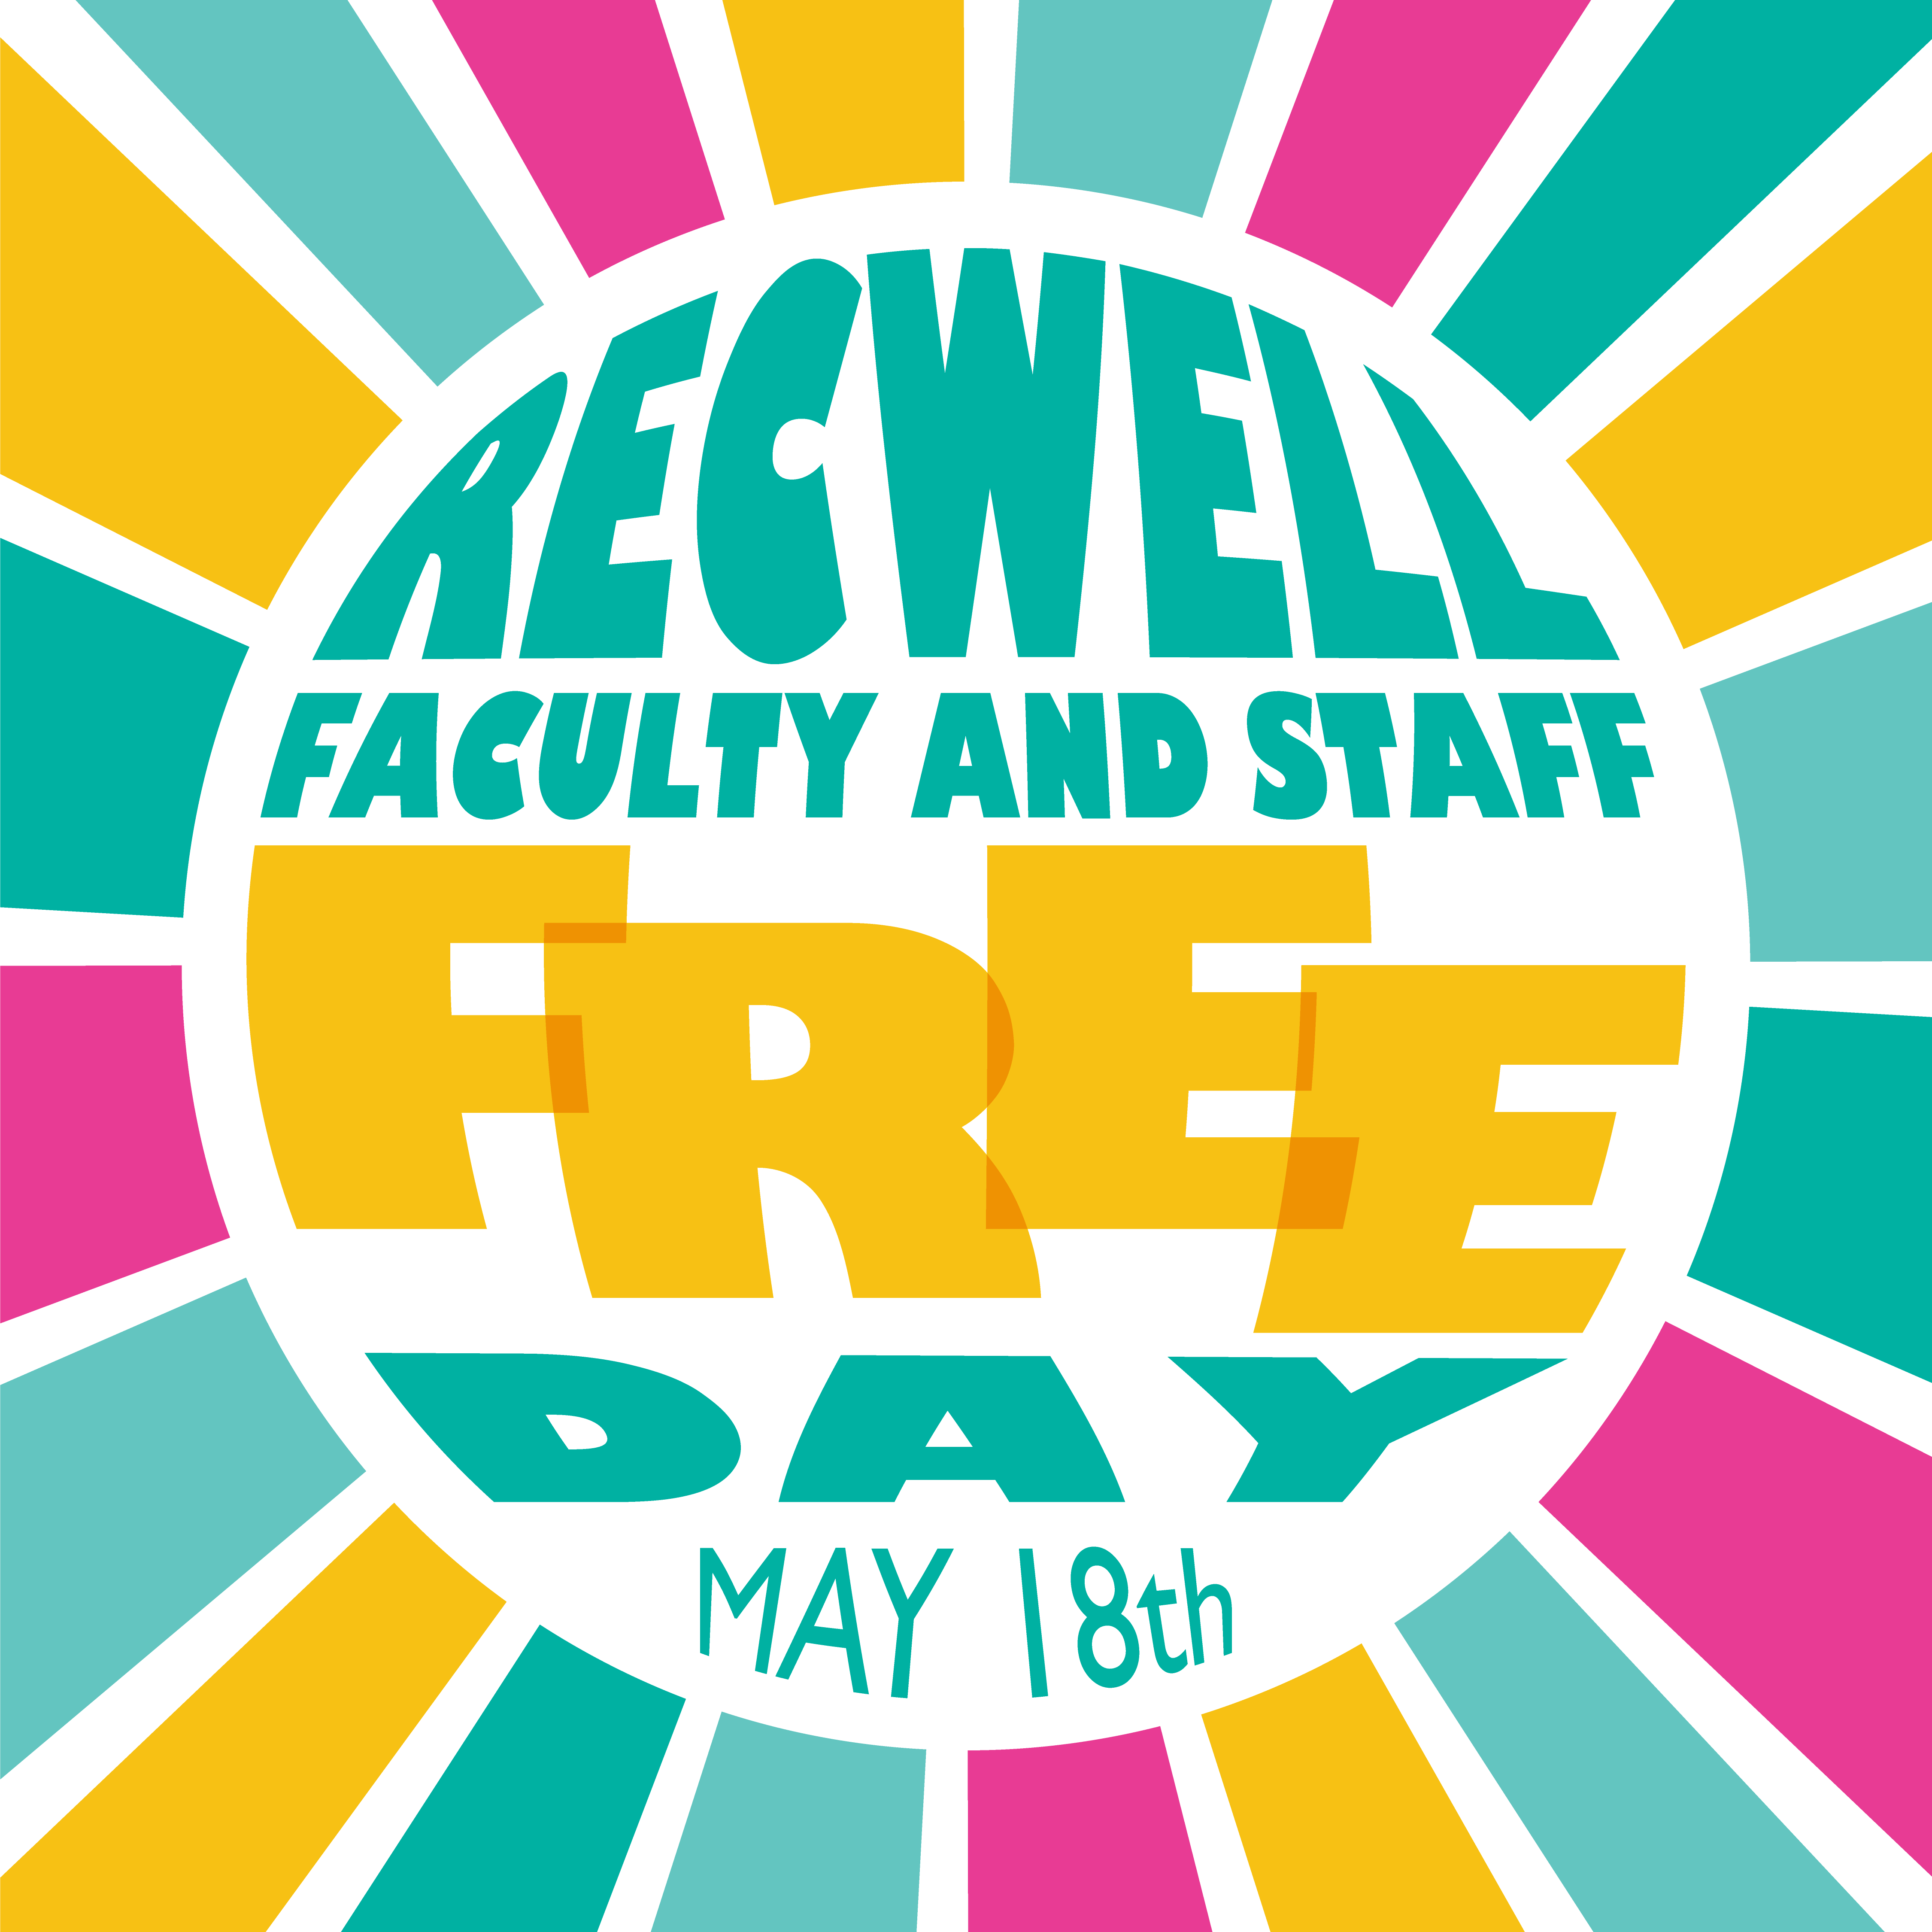 colorful graphic with the text "RecWell Faculty and Staff Free Day, May 18th"